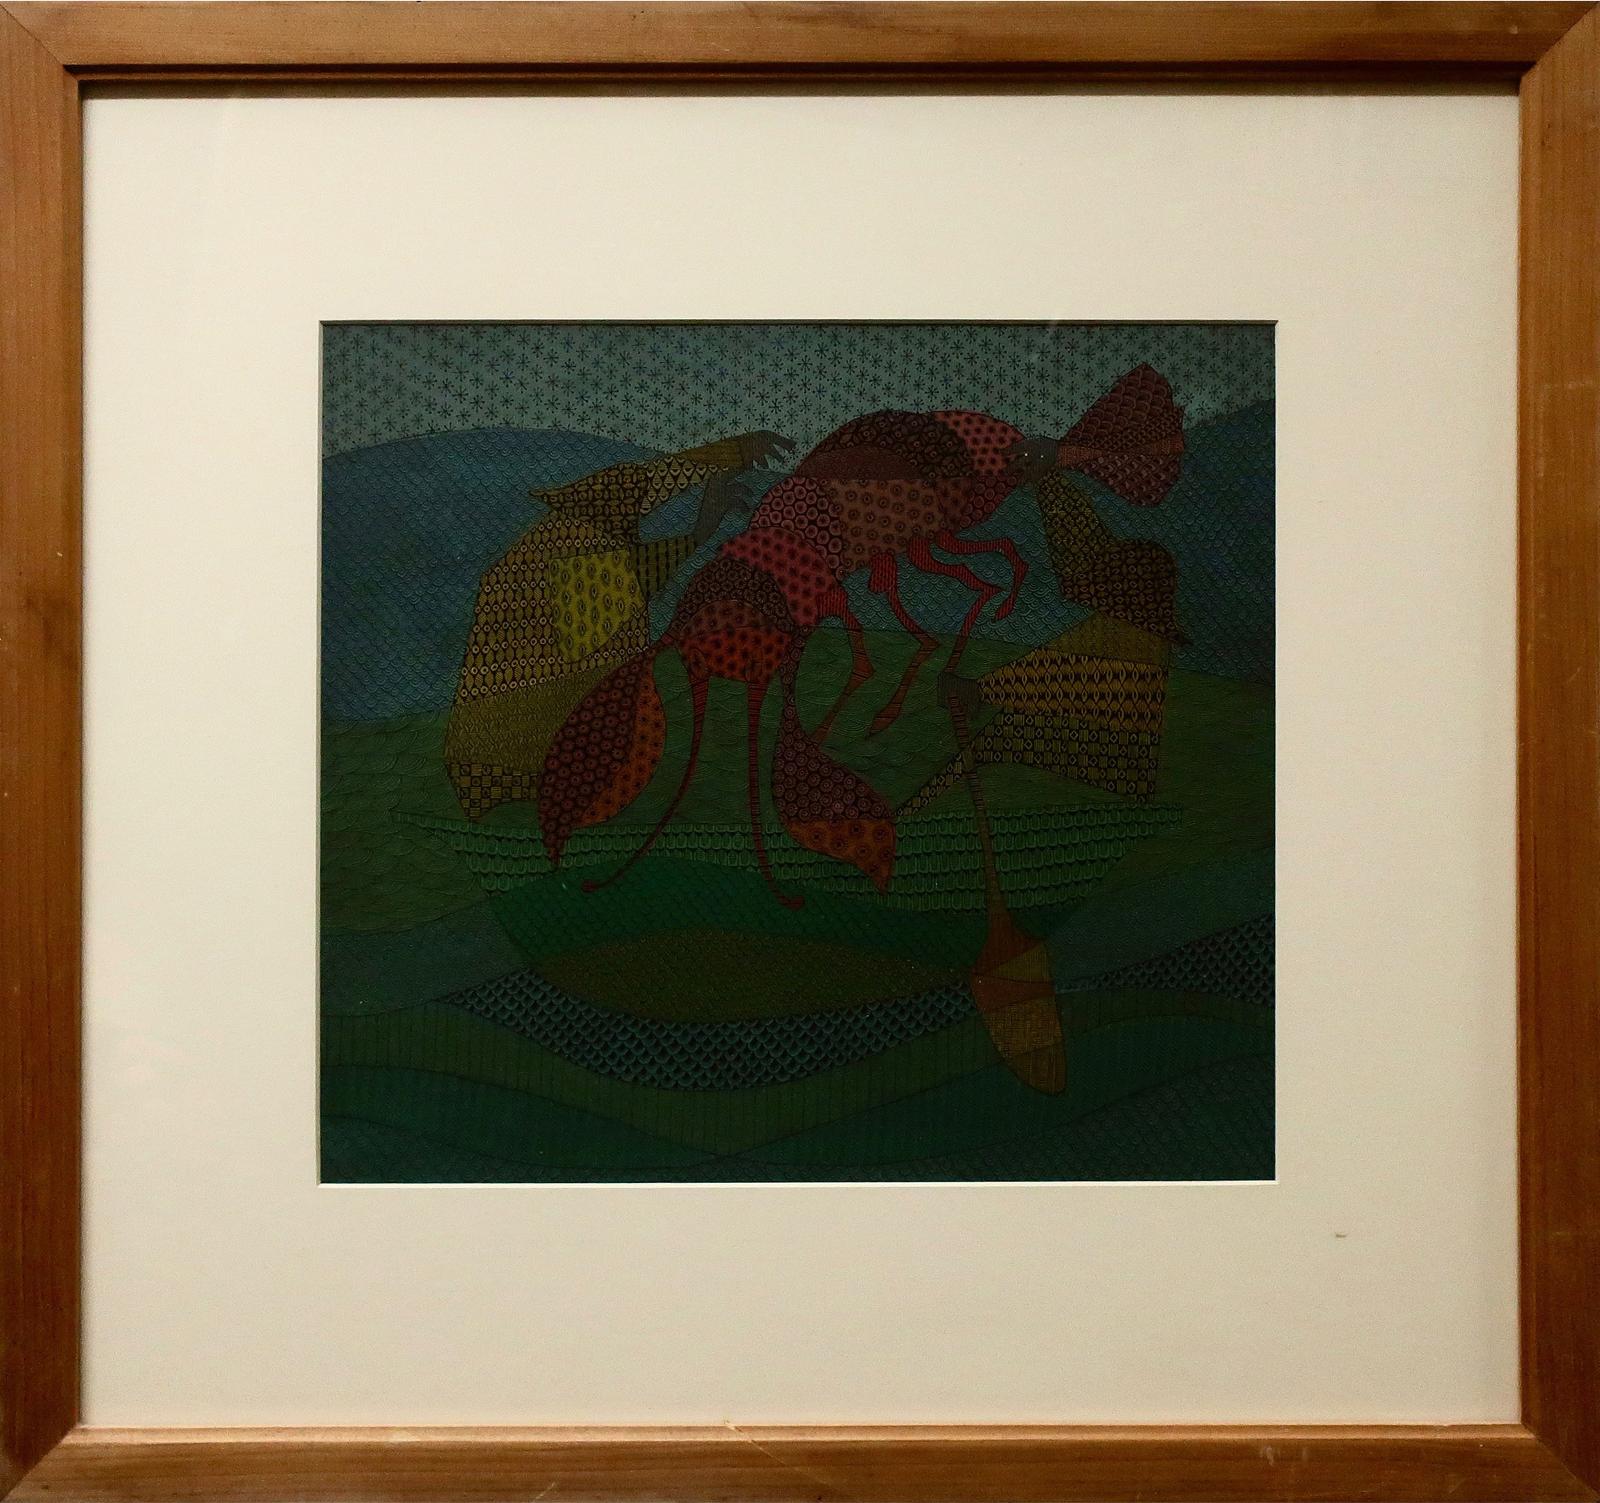 Anna P. Baker (1928-1985) - Untitled (The Great Lobster Catch)